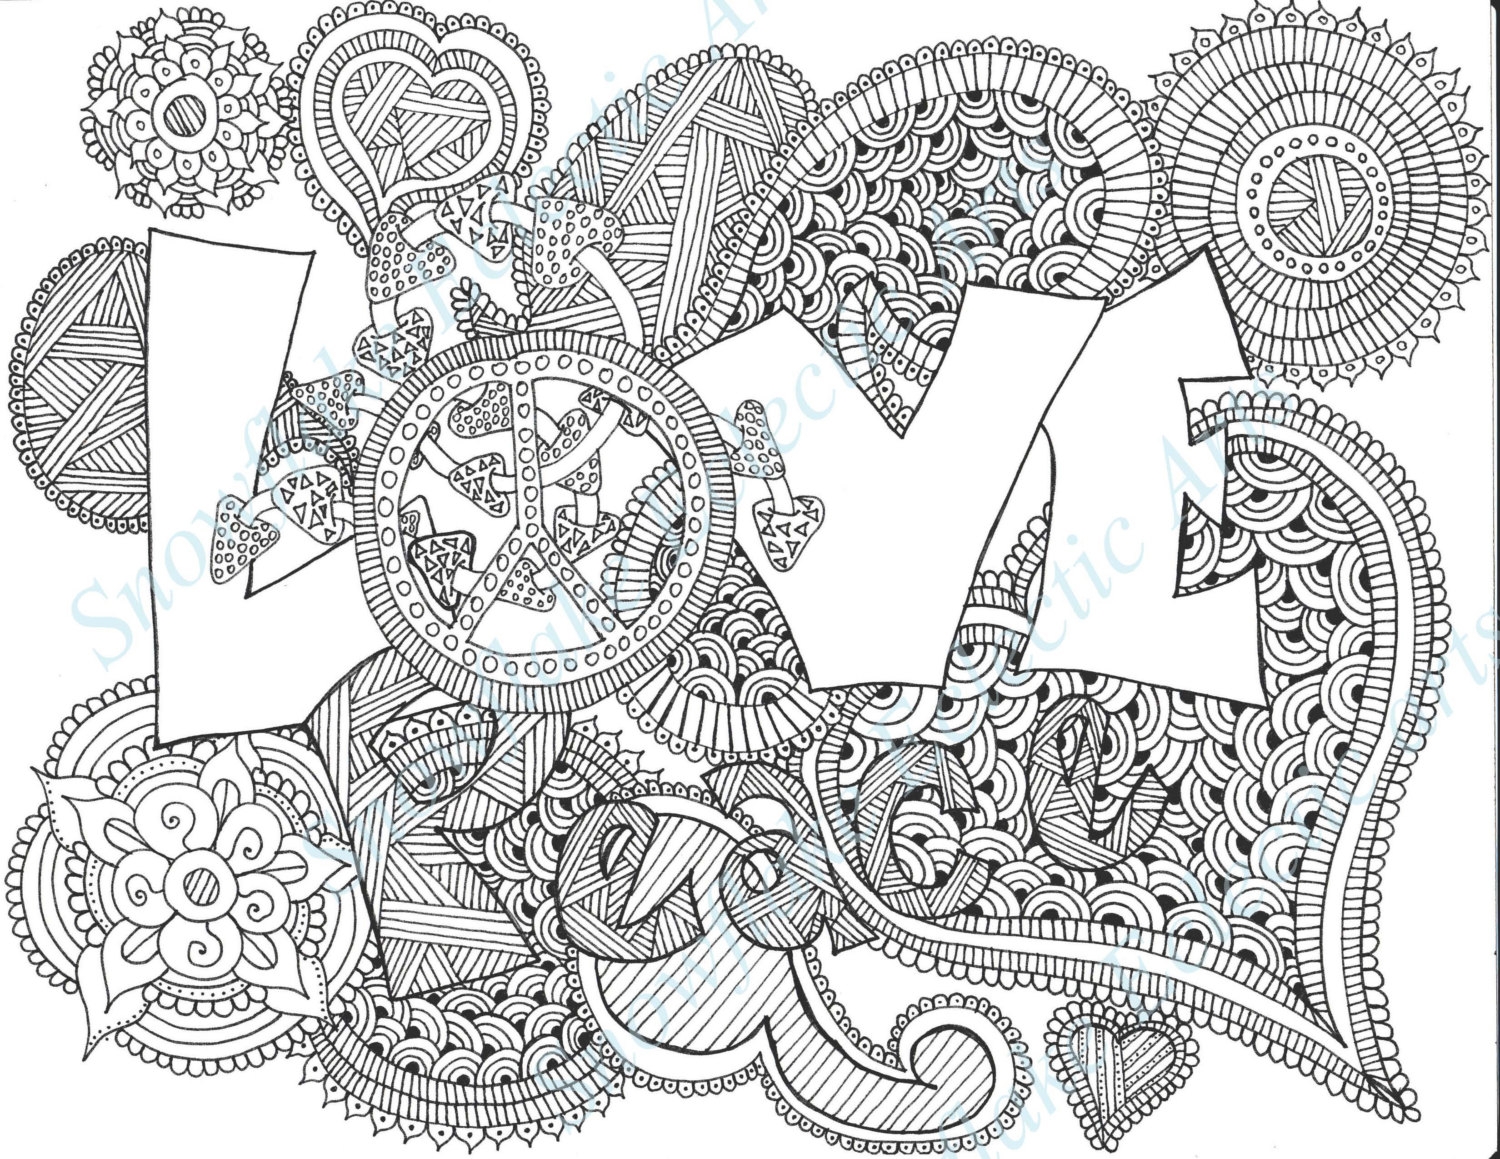 Free Printable Coloring Books For Adults Pdf Check out our huge